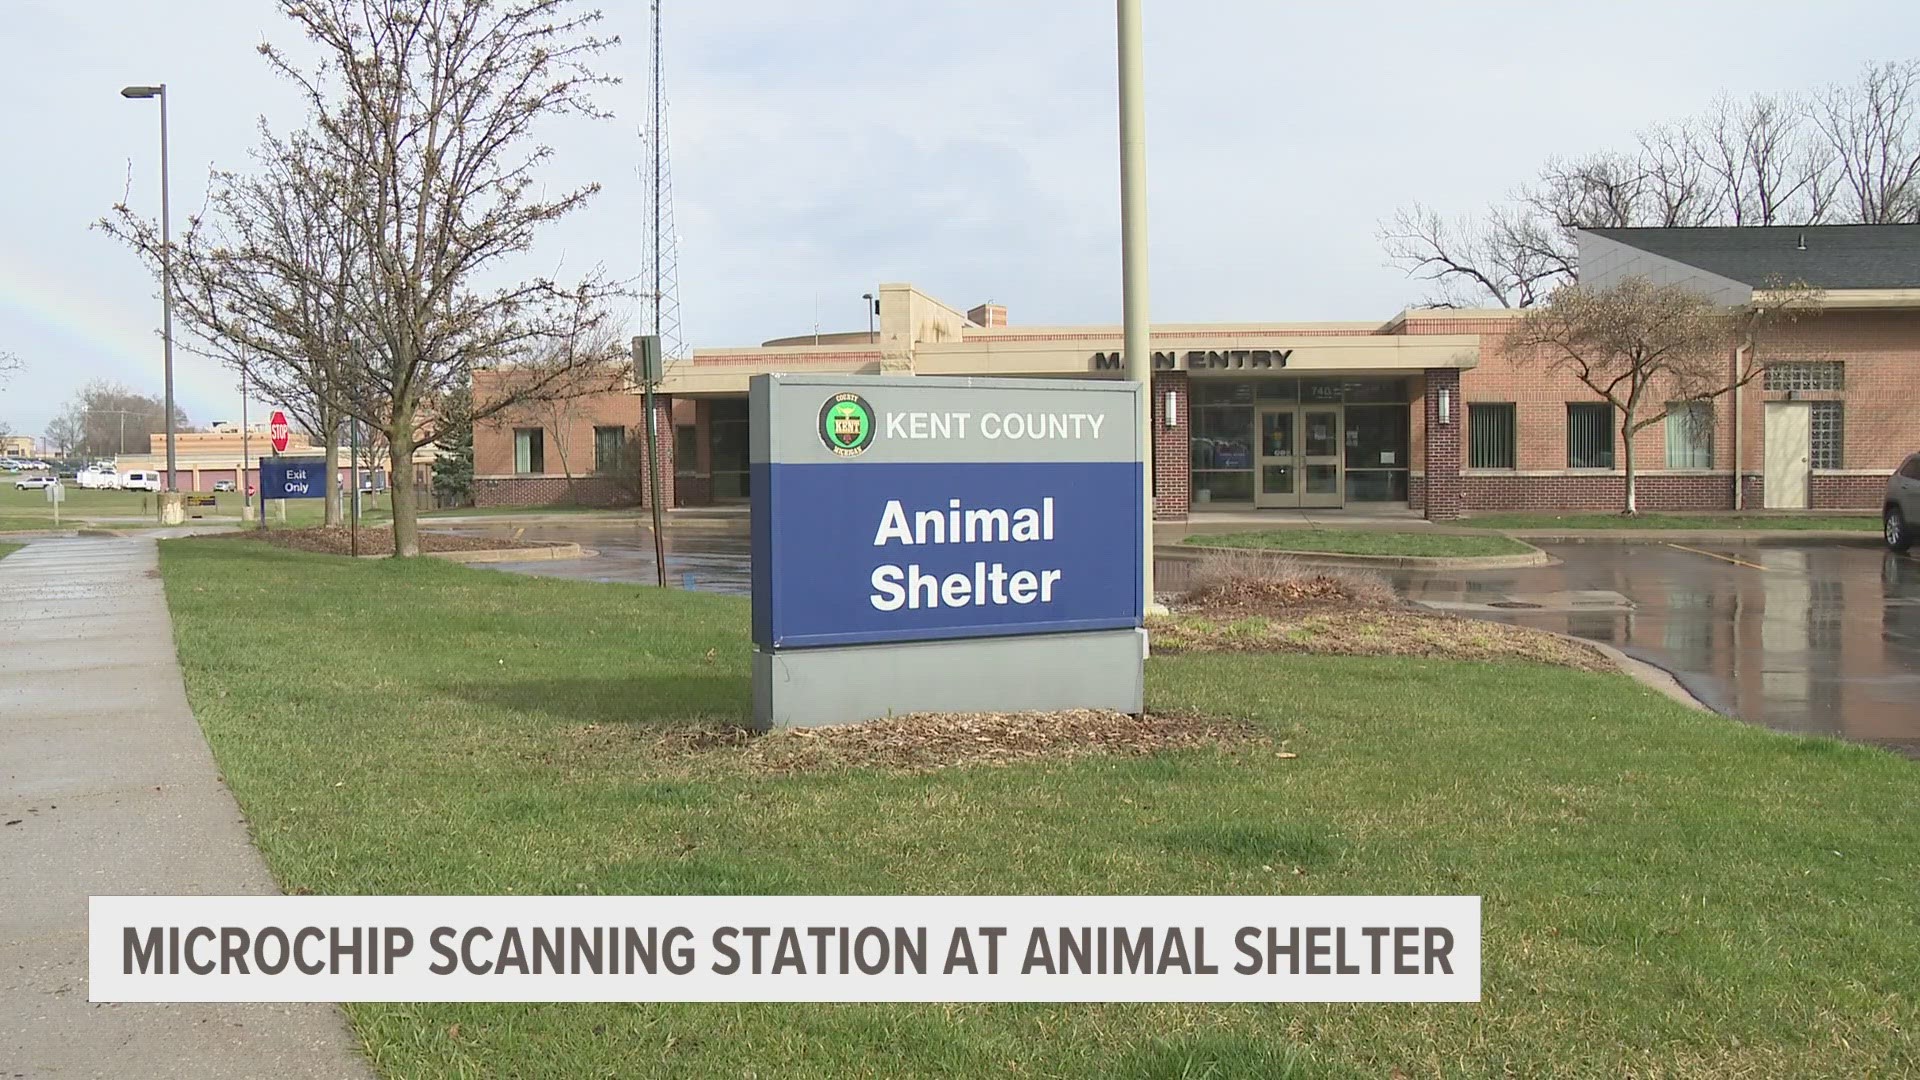 A new microchip scanning station at Kent County Animal Shelter is helping pets reunite with their pet owners.